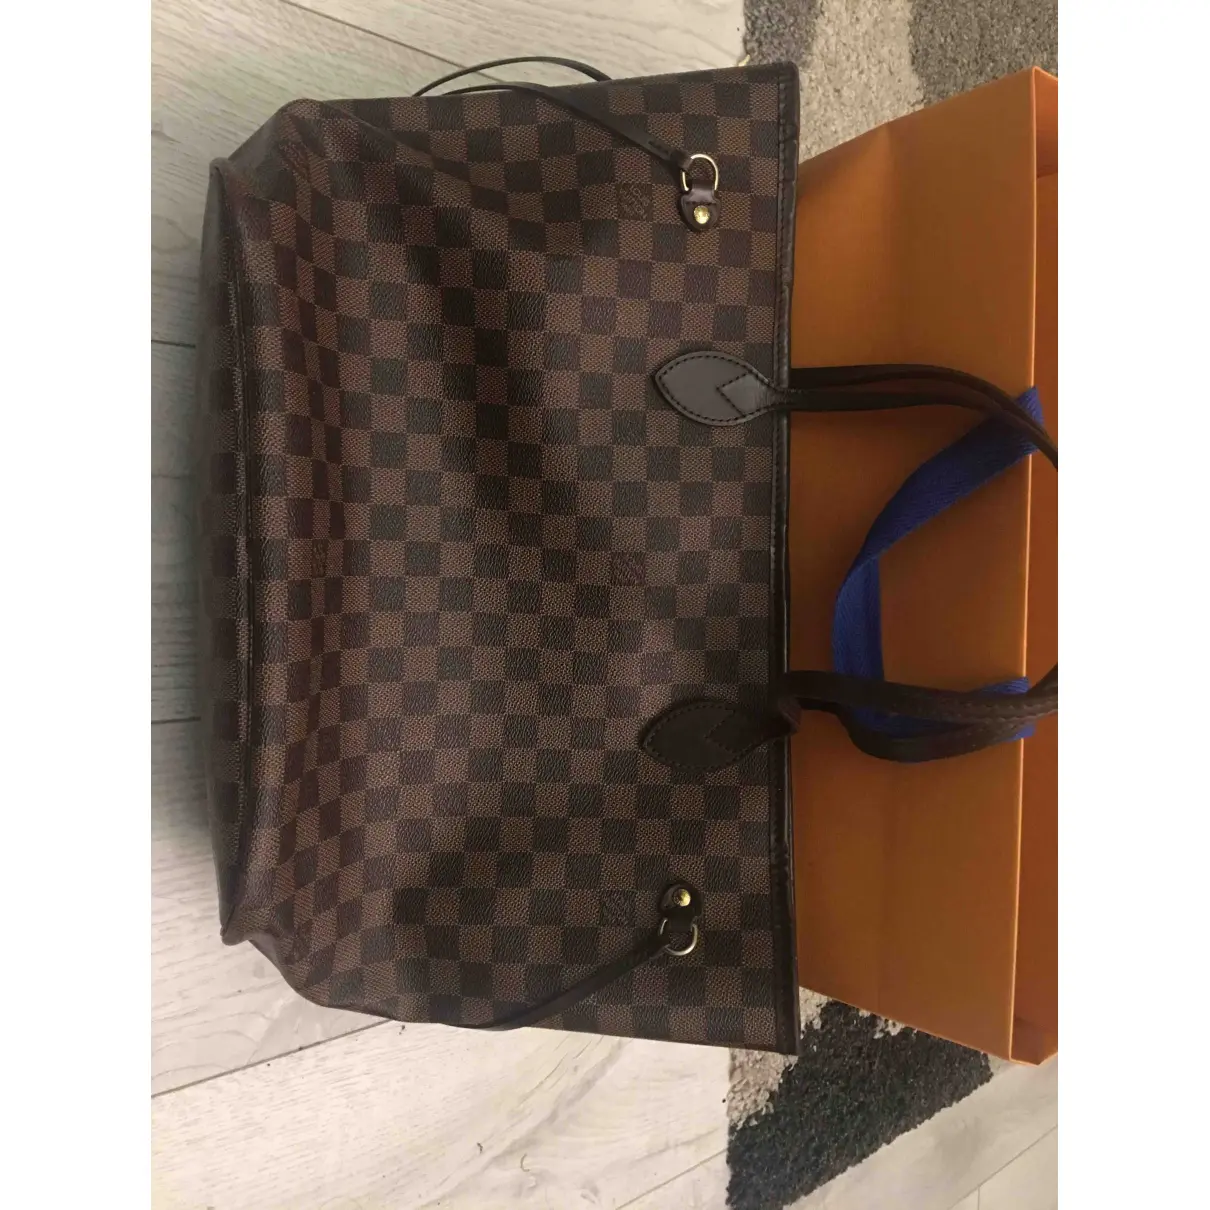 Buy Louis Vuitton Neverfull cloth tote online